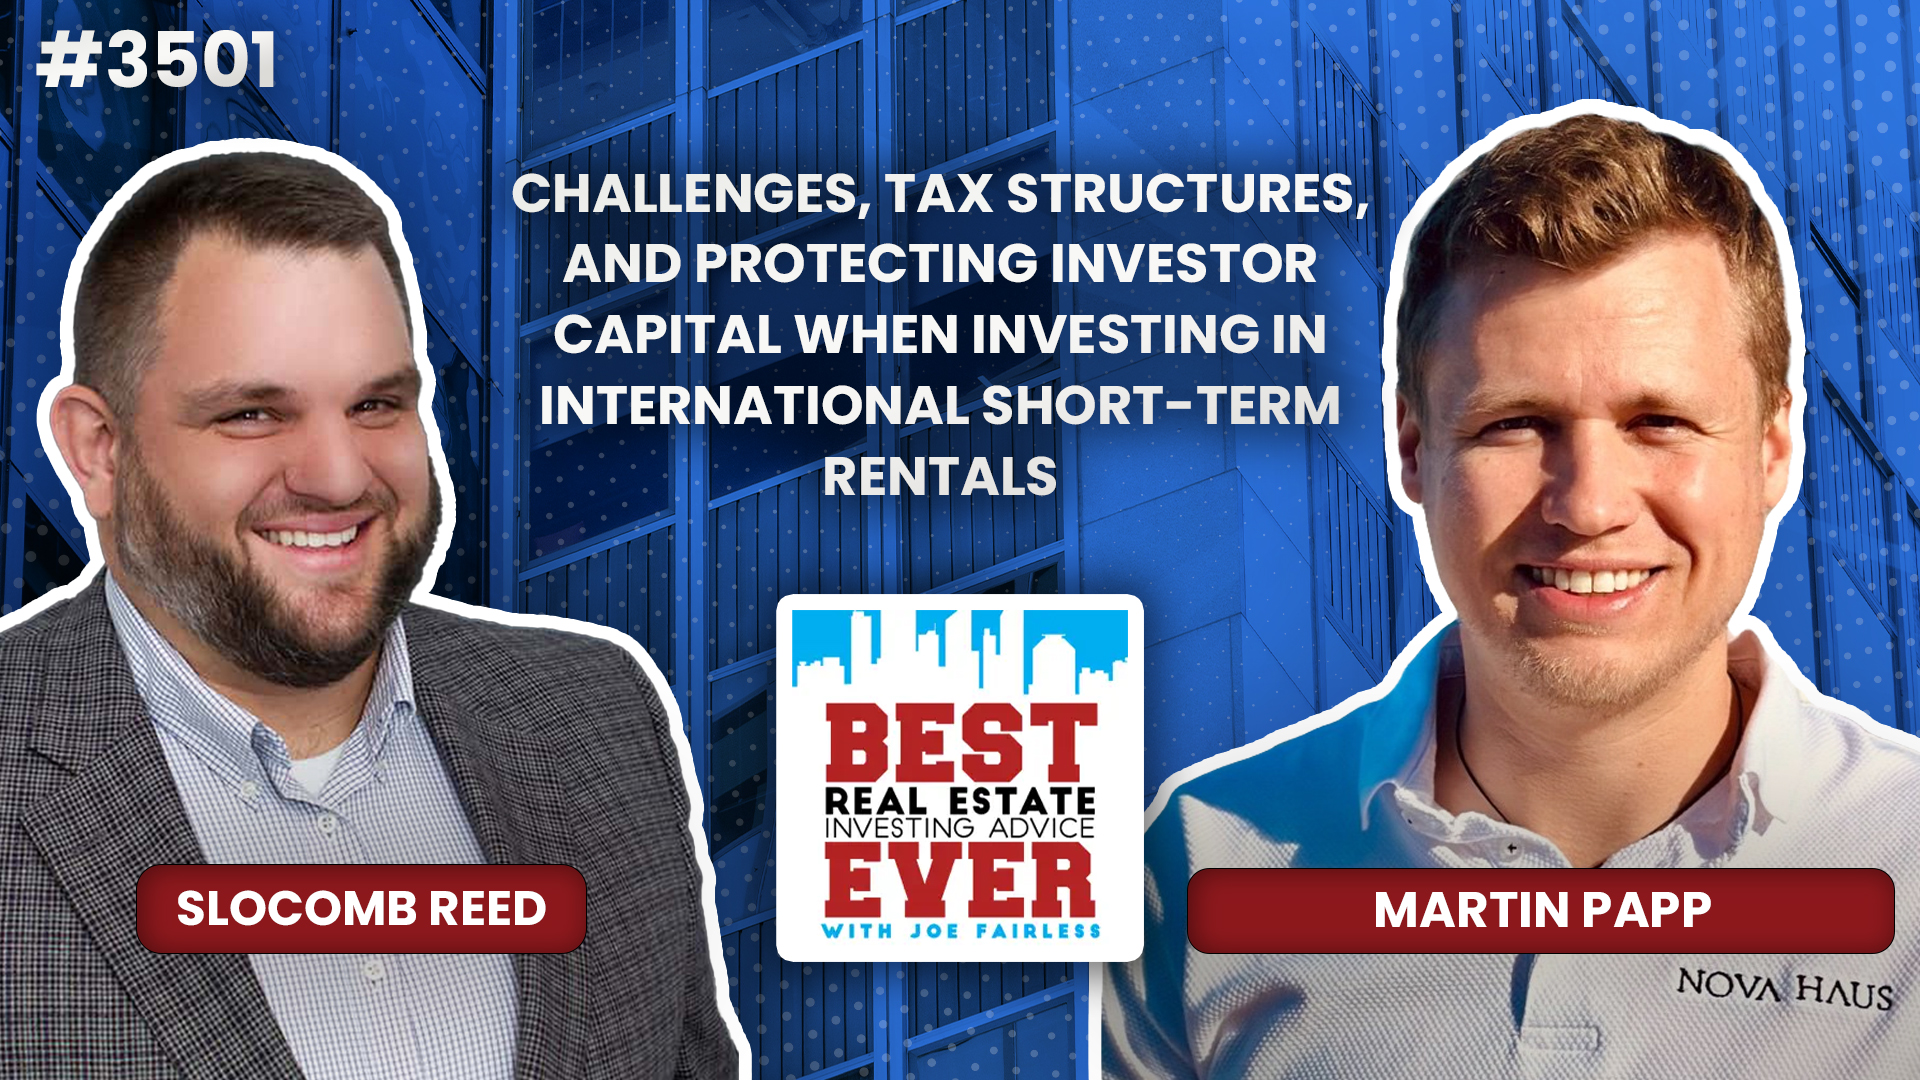 JF3501: Challenges, Tax Structures, and Protecting Investor Capital When Investing in International Short-Term Rentals ft. Martin Papp